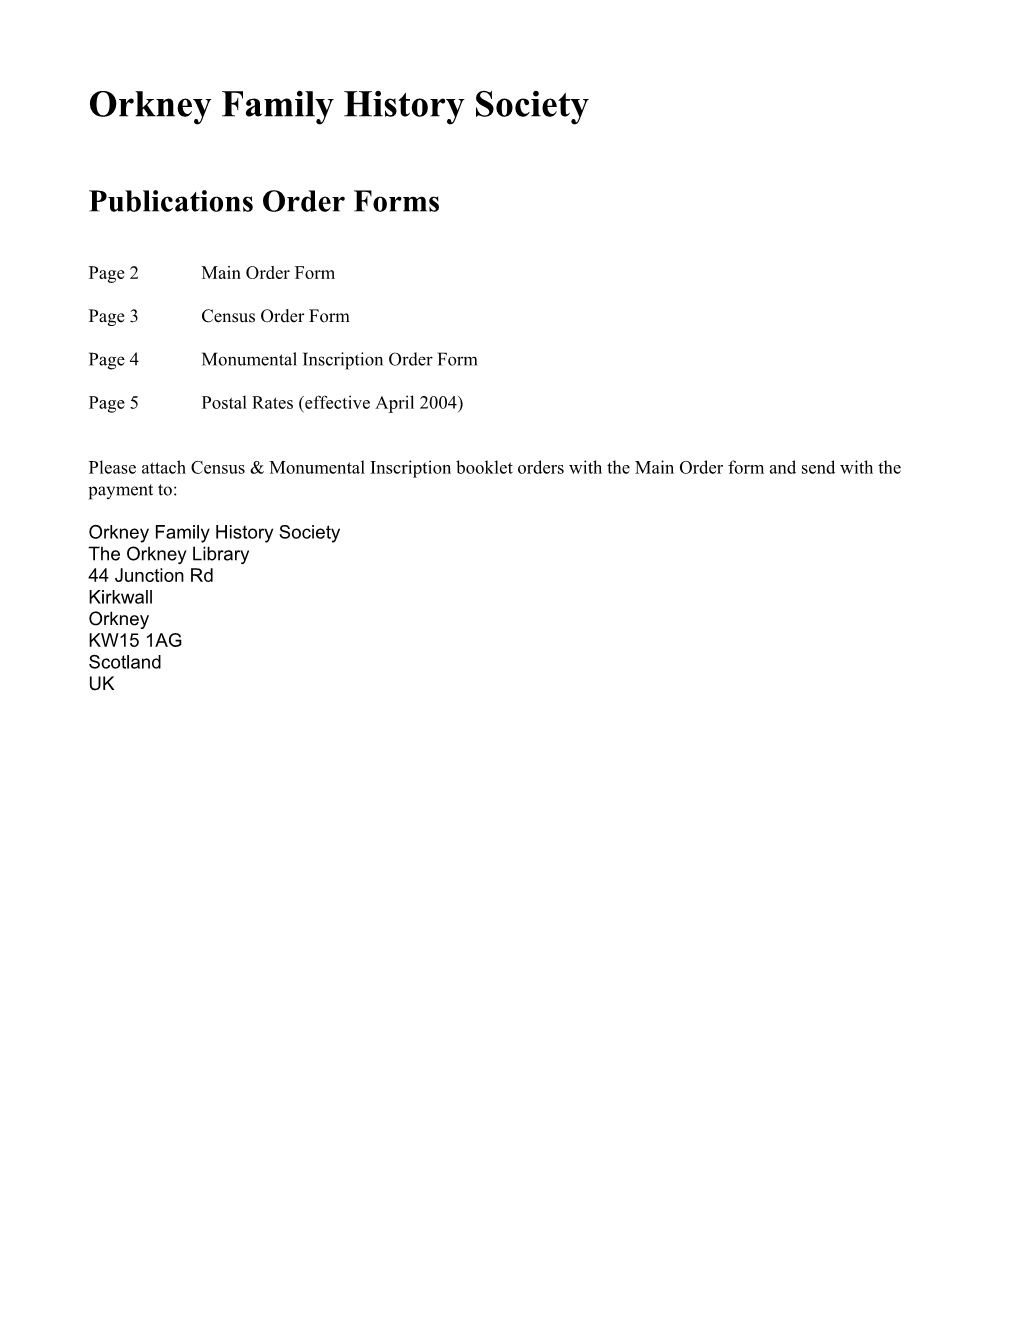 Orkney Family History Society Publications Order Forms